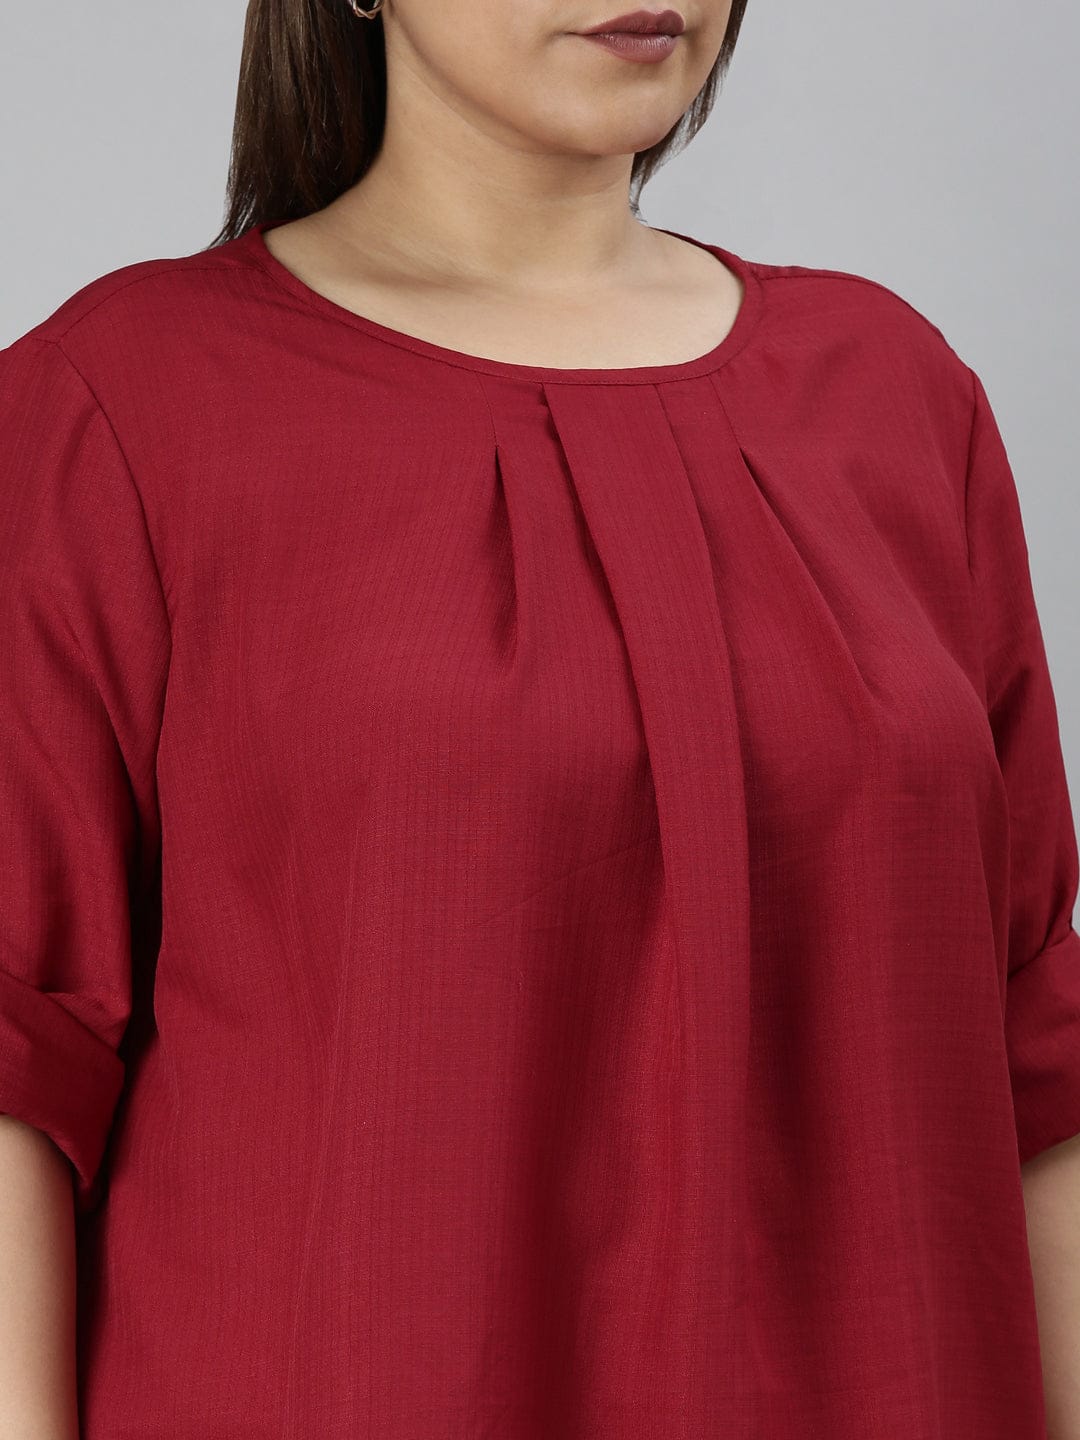 TheShaili - Women's Regular fit Solid Maroon pleated top